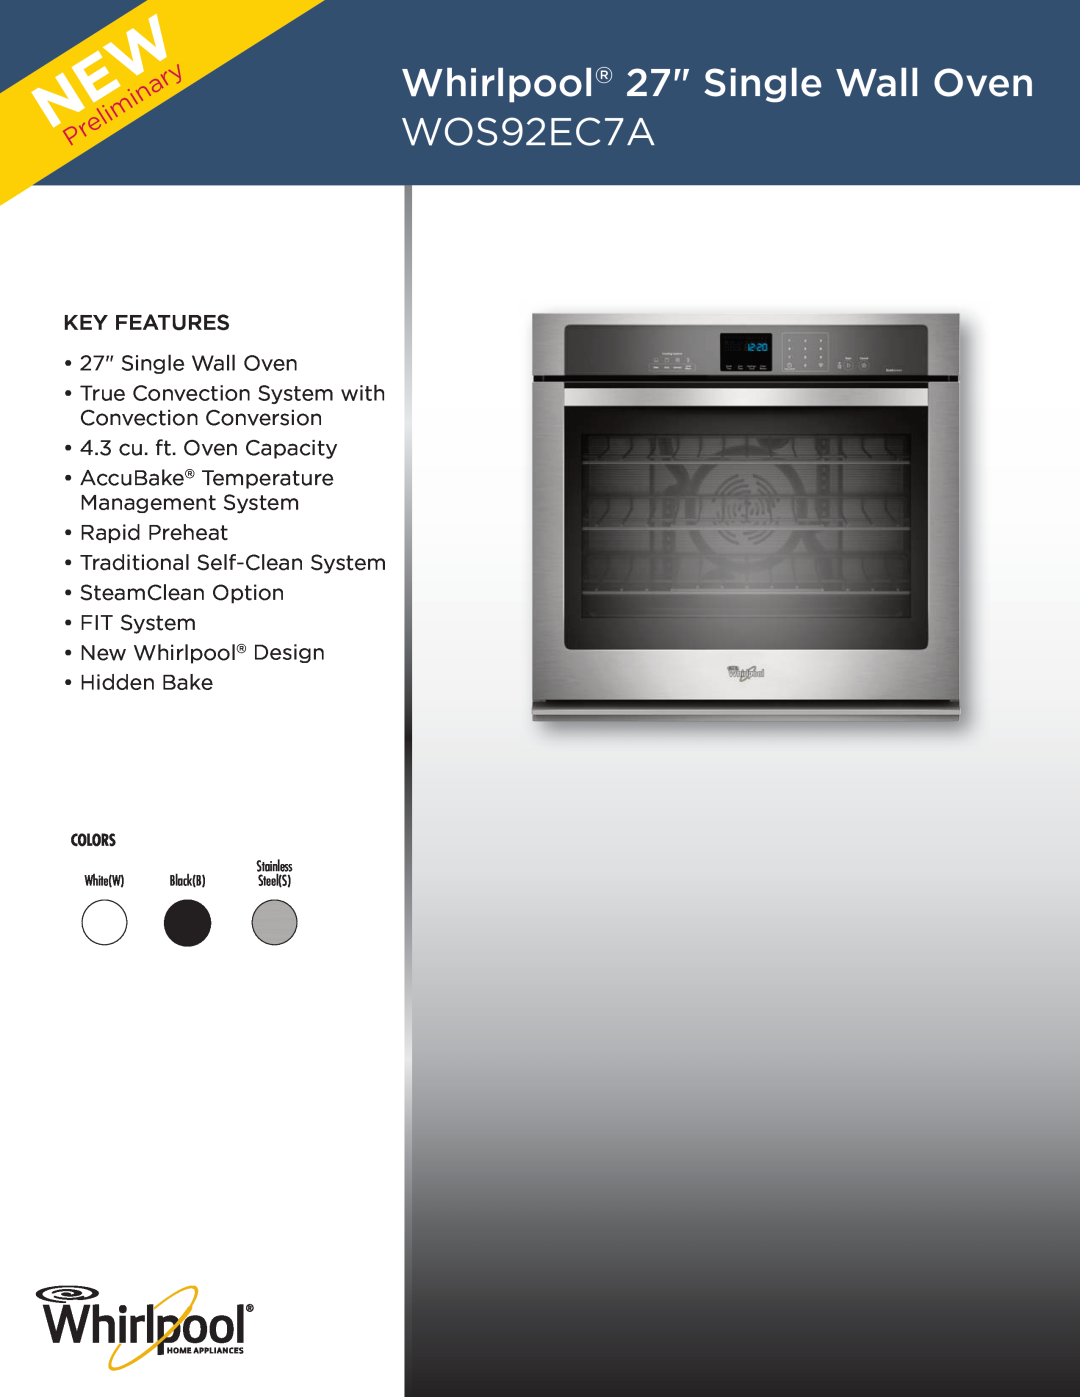 Whirlpool WOS51EC0A Whirlpool 27 Single Wall Oven WOS92EC7A, NEWPreliminary, key features 27 Single Wall Oven, Colors 